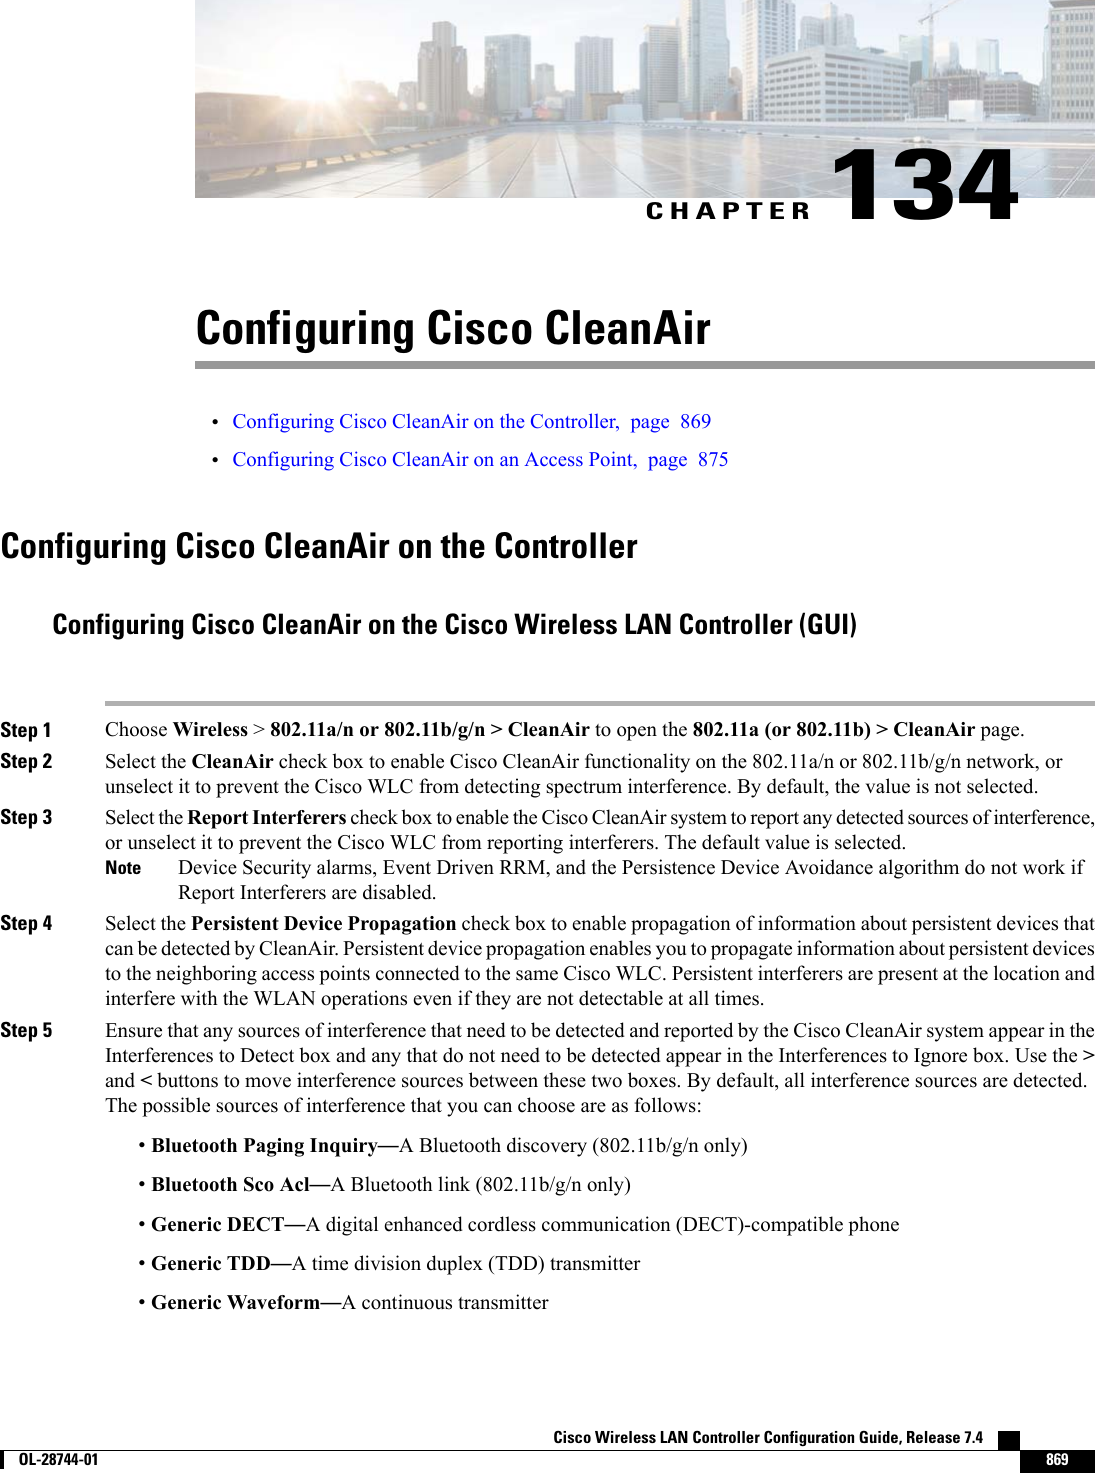 CHAPTER 134Configuring Cisco CleanAir•Configuring Cisco CleanAir on the Controller, page 869•Configuring Cisco CleanAir on an Access Point, page 875Configuring Cisco CleanAir on the ControllerConfiguring Cisco CleanAir on the Cisco Wireless LAN Controller (GUI)Step 1 Choose Wireless &gt;802.11a/n or 802.11b/g/n &gt; CleanAir to open the 802.11a (or 802.11b) &gt; CleanAir page.Step 2 Select the CleanAir check box to enable Cisco CleanAir functionality on the 802.11a/n or 802.11b/g/n network, orunselect it to prevent the Cisco WLC from detecting spectrum interference. By default, the value is not selected.Step 3 Select the Report Interferers check box to enable the Cisco CleanAir system to report any detected sources of interference,or unselect it to prevent the Cisco WLC from reporting interferers. The default value is selected.Device Security alarms, Event Driven RRM, and the Persistence Device Avoidance algorithm do not work ifReport Interferers are disabled.NoteStep 4 Select the Persistent Device Propagation check box to enable propagation of information about persistent devices thatcan be detected by CleanAir. Persistent device propagation enables you to propagate information about persistent devicesto the neighboring access points connected to the same Cisco WLC. Persistent interferers are present at the location andinterfere with the WLAN operations even if they are not detectable at all times.Step 5 Ensure that any sources of interference that need to be detected and reported by the Cisco CleanAir system appear in theInterferences to Detect box and any that do not need to be detected appear in the Interferences to Ignore box. Use the &gt;and &lt;buttons to move interference sources between these two boxes. By default, all interference sources are detected.The possible sources of interference that you can choose are as follows:•Bluetooth Paging Inquiry—A Bluetooth discovery (802.11b/g/n only)•Bluetooth Sco Acl—A Bluetooth link (802.11b/g/n only)•Generic DECT—A digital enhanced cordless communication (DECT)-compatible phone•Generic TDD—A time division duplex (TDD) transmitter•Generic Waveform—A continuous transmitterCisco Wireless LAN Controller Configuration Guide, Release 7.4        OL-28744-01 869